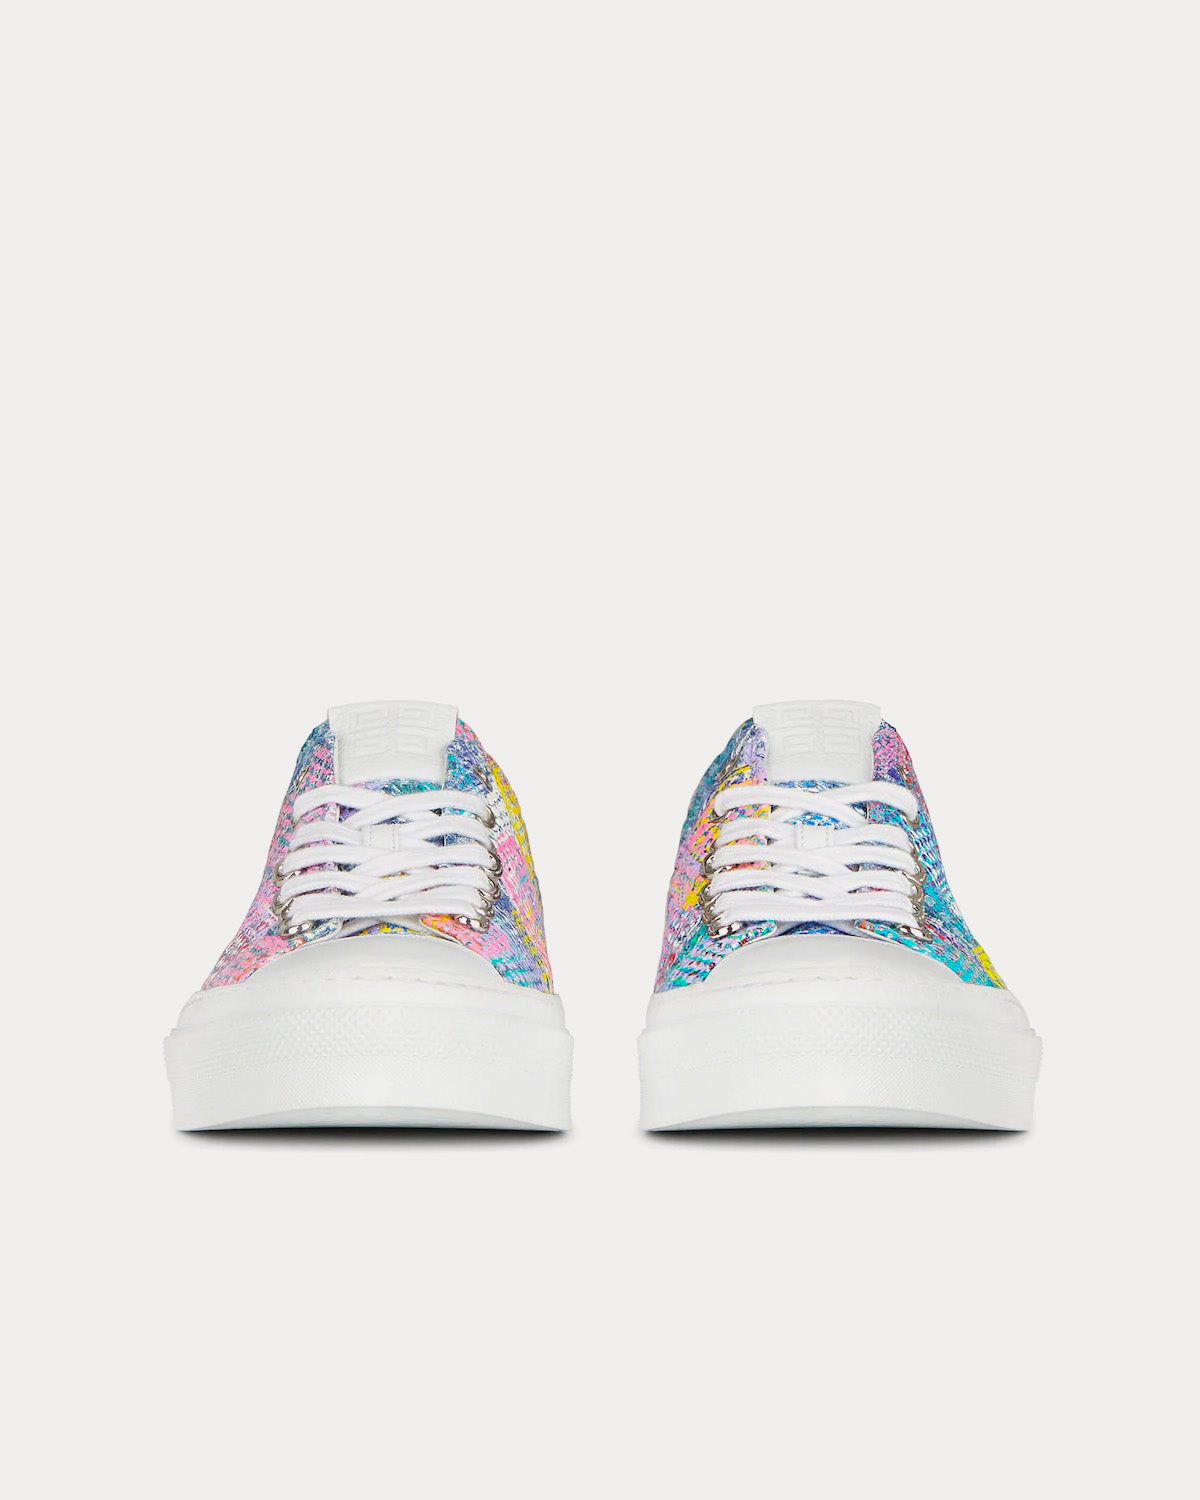 Givenchy x BSTROY - City Printed 4G Denim Multi Low Top Sneakers